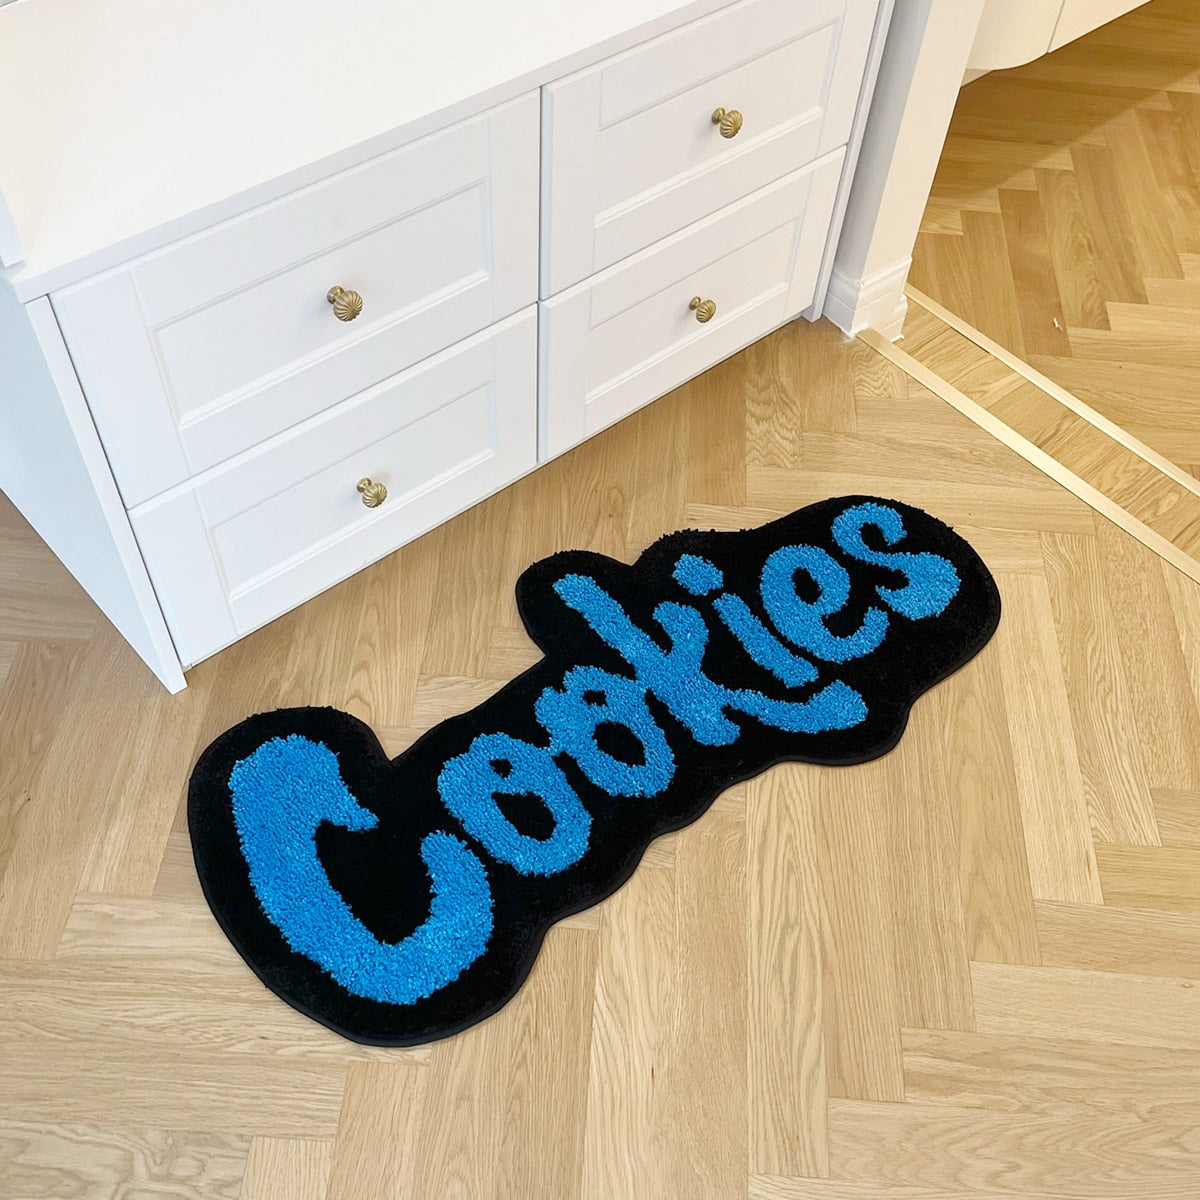 CORX Designs - Cookies Blue Rug - Review